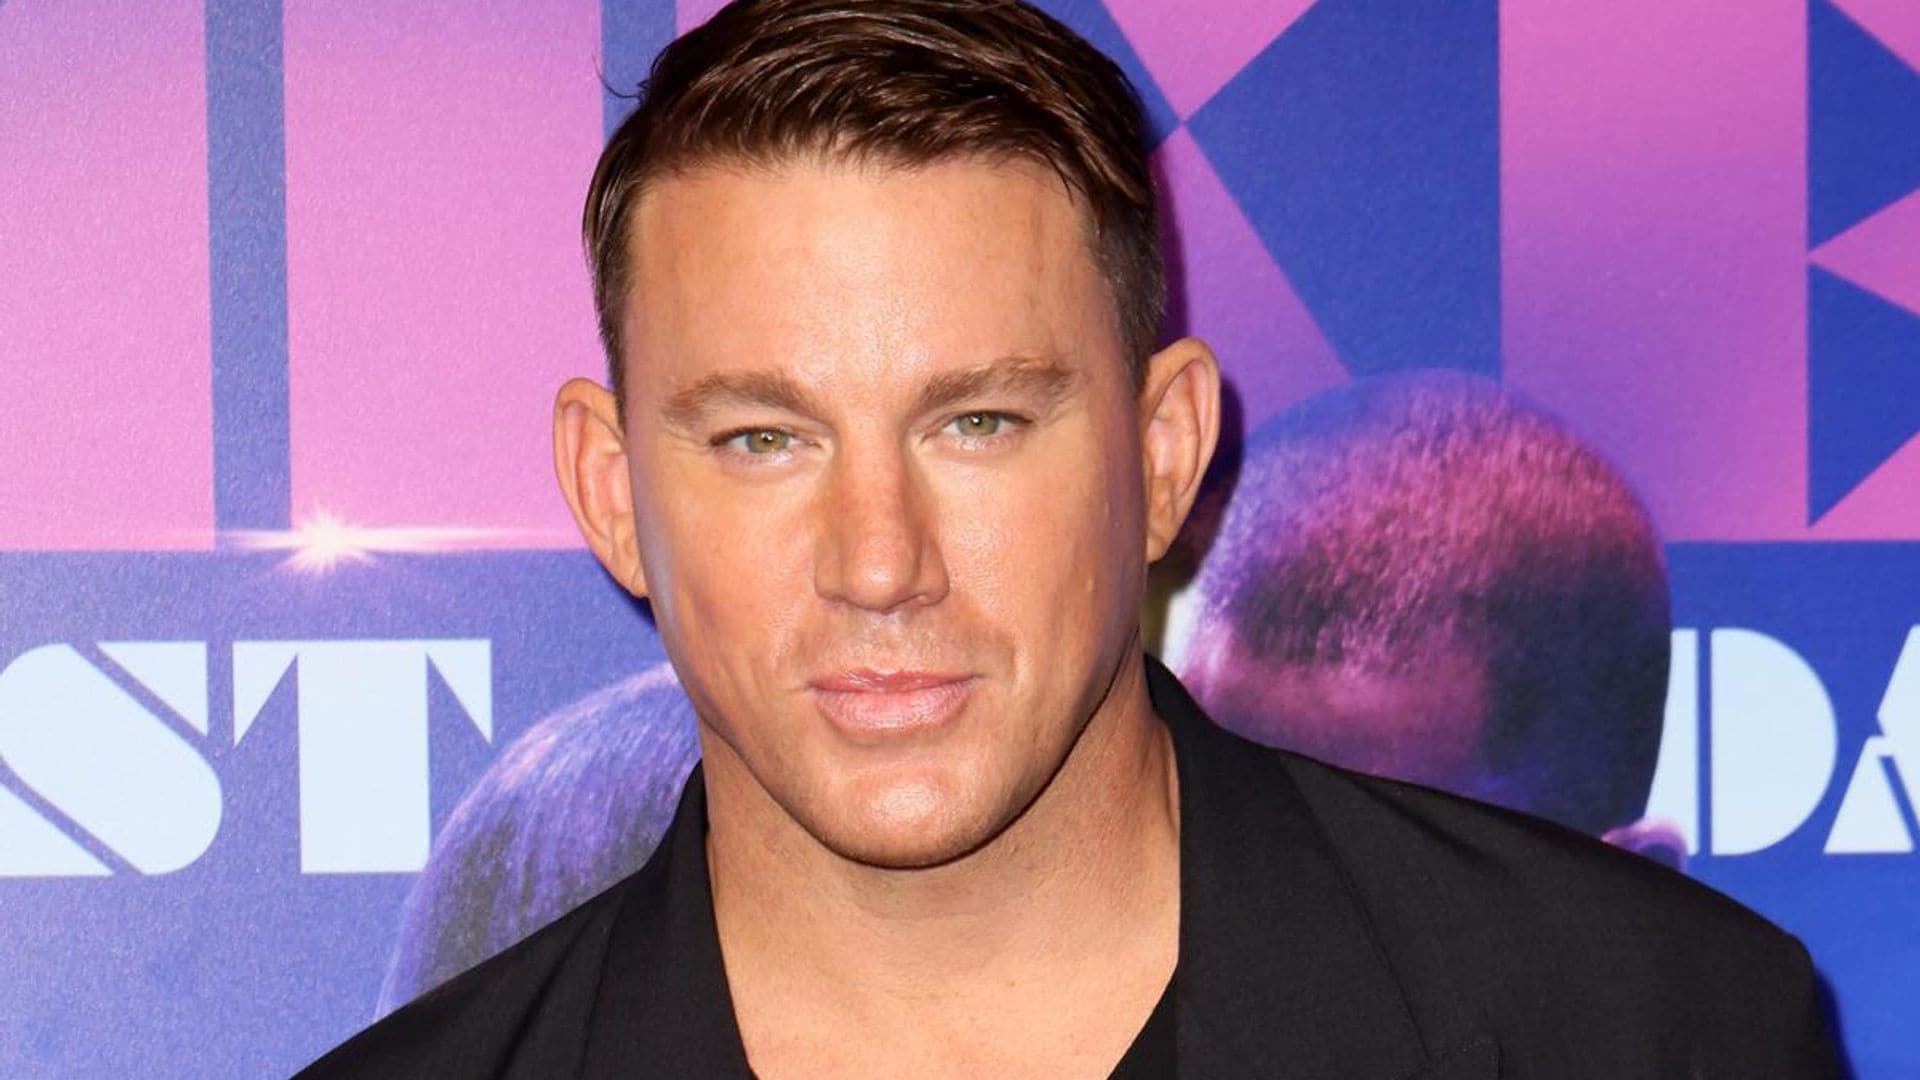 Why Channing Tatum will be honest with his daughter about his stripper past